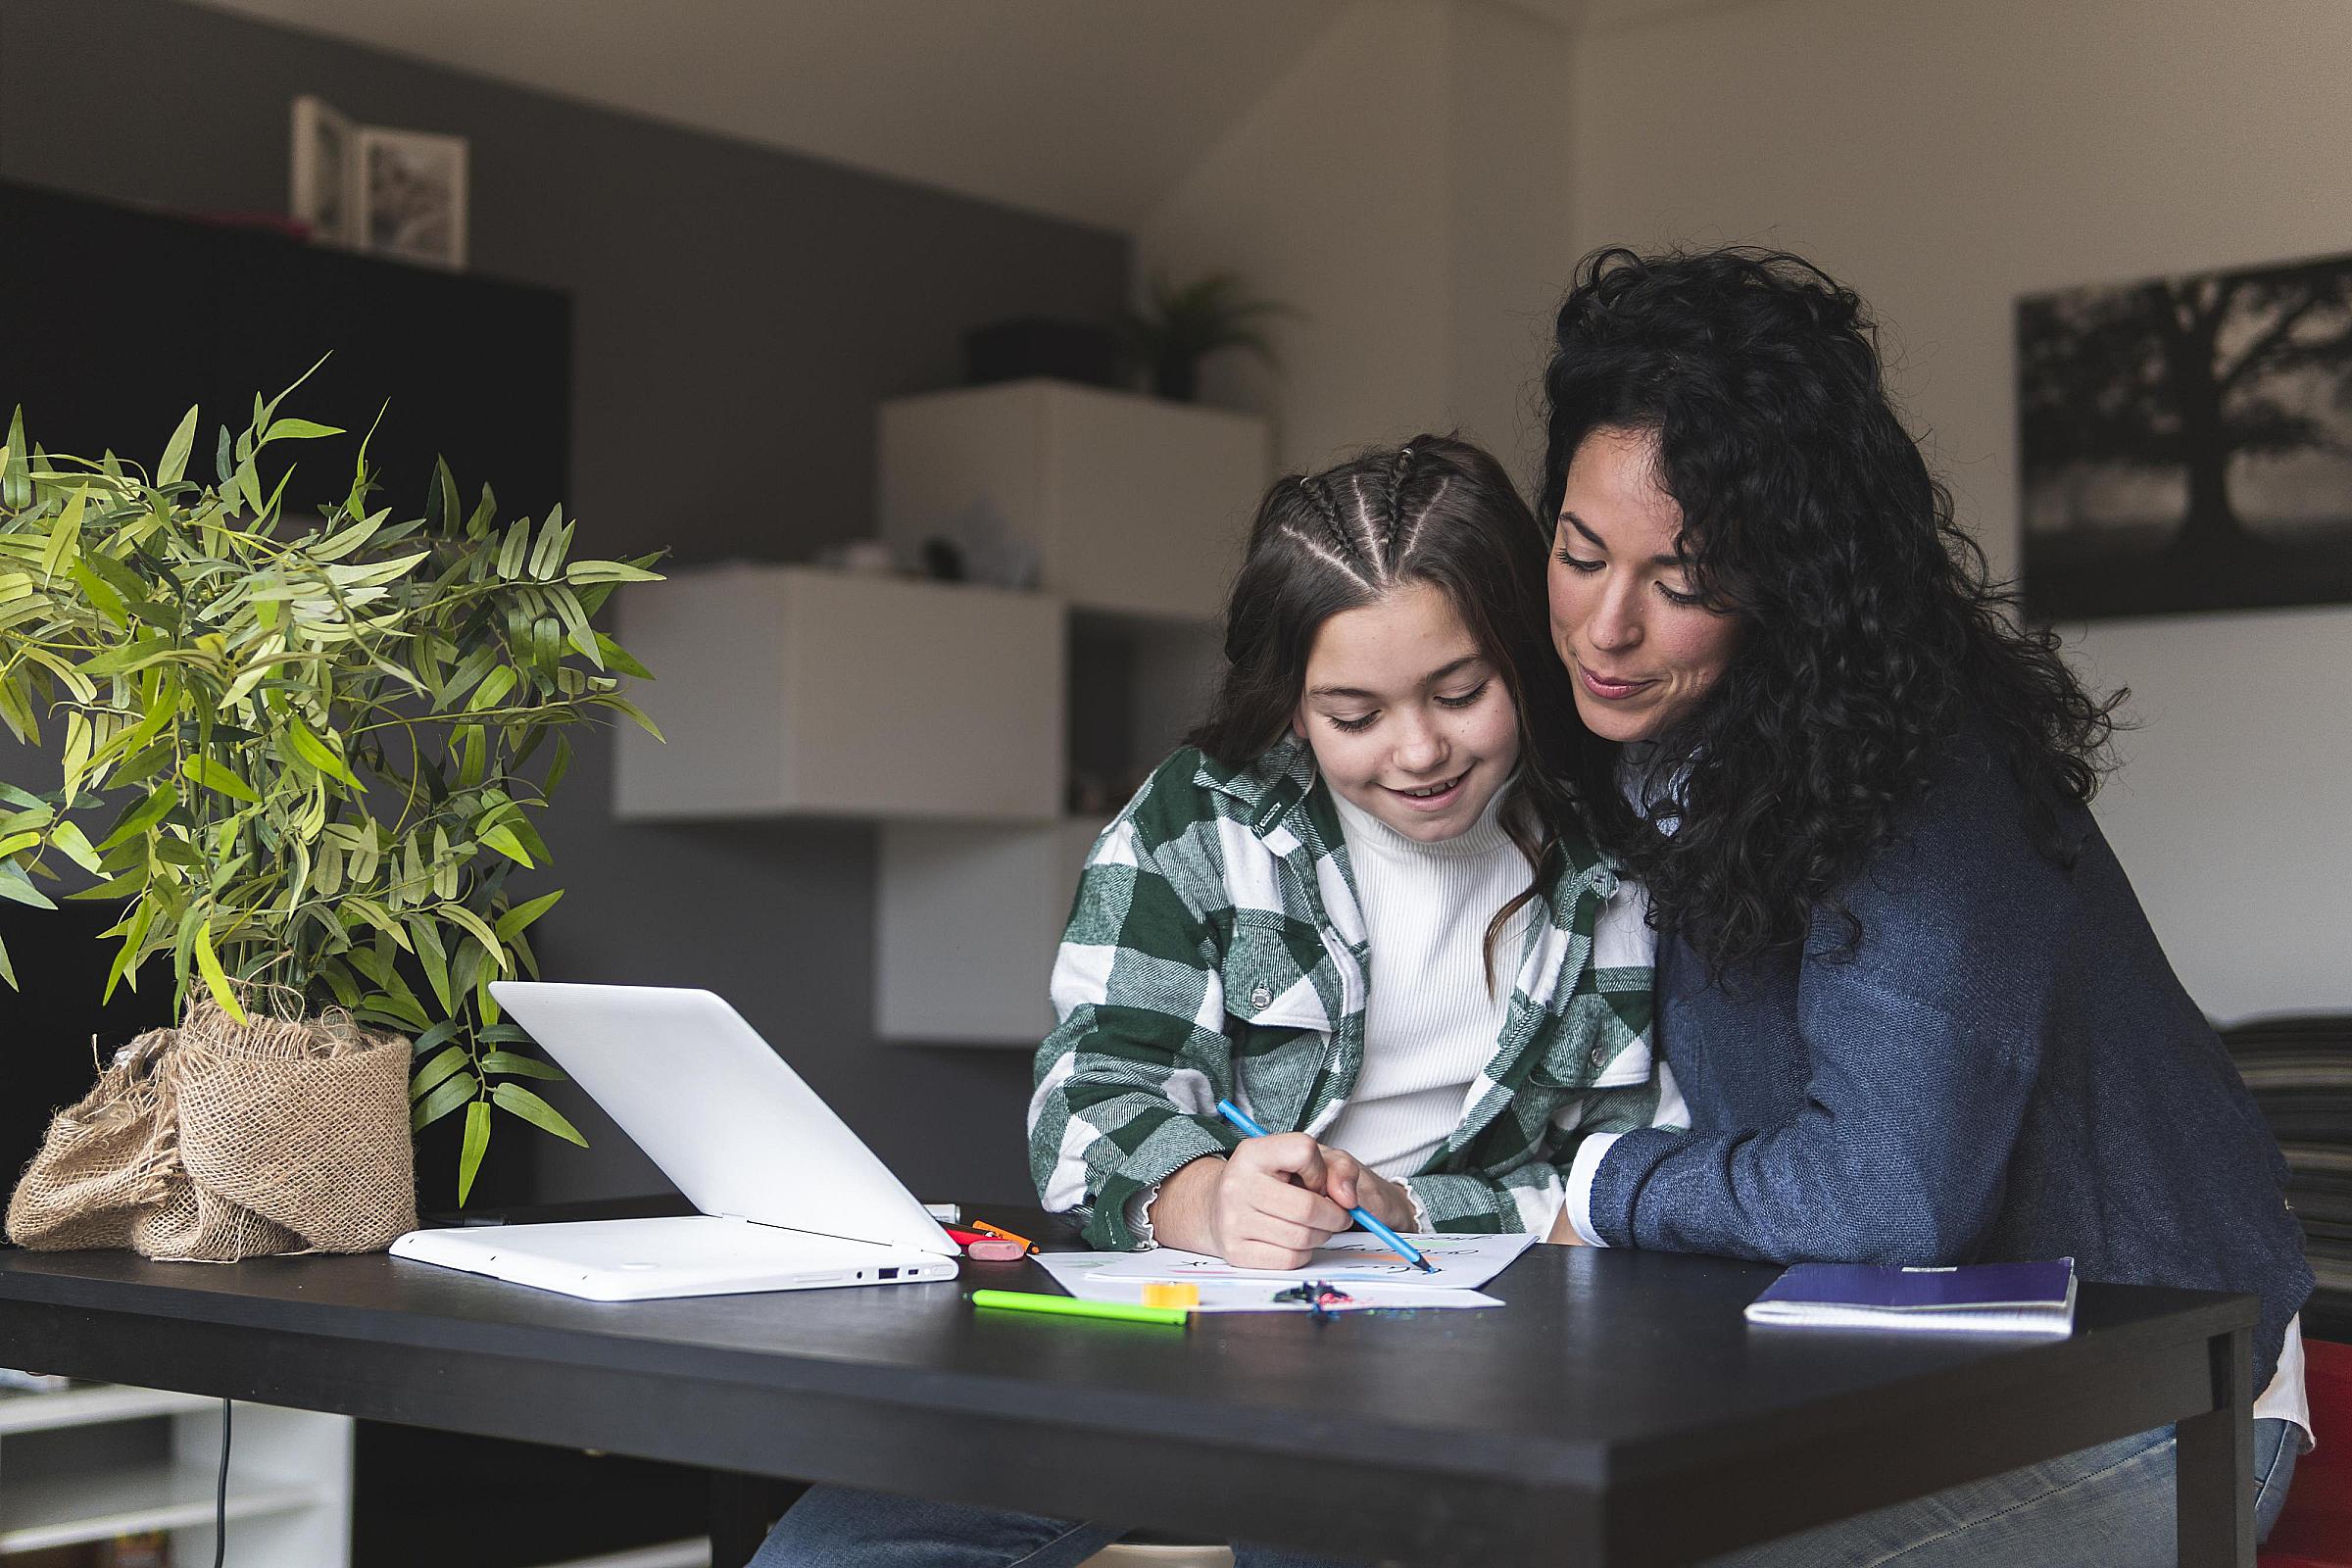 Mother sitting with child at desk helping with school work